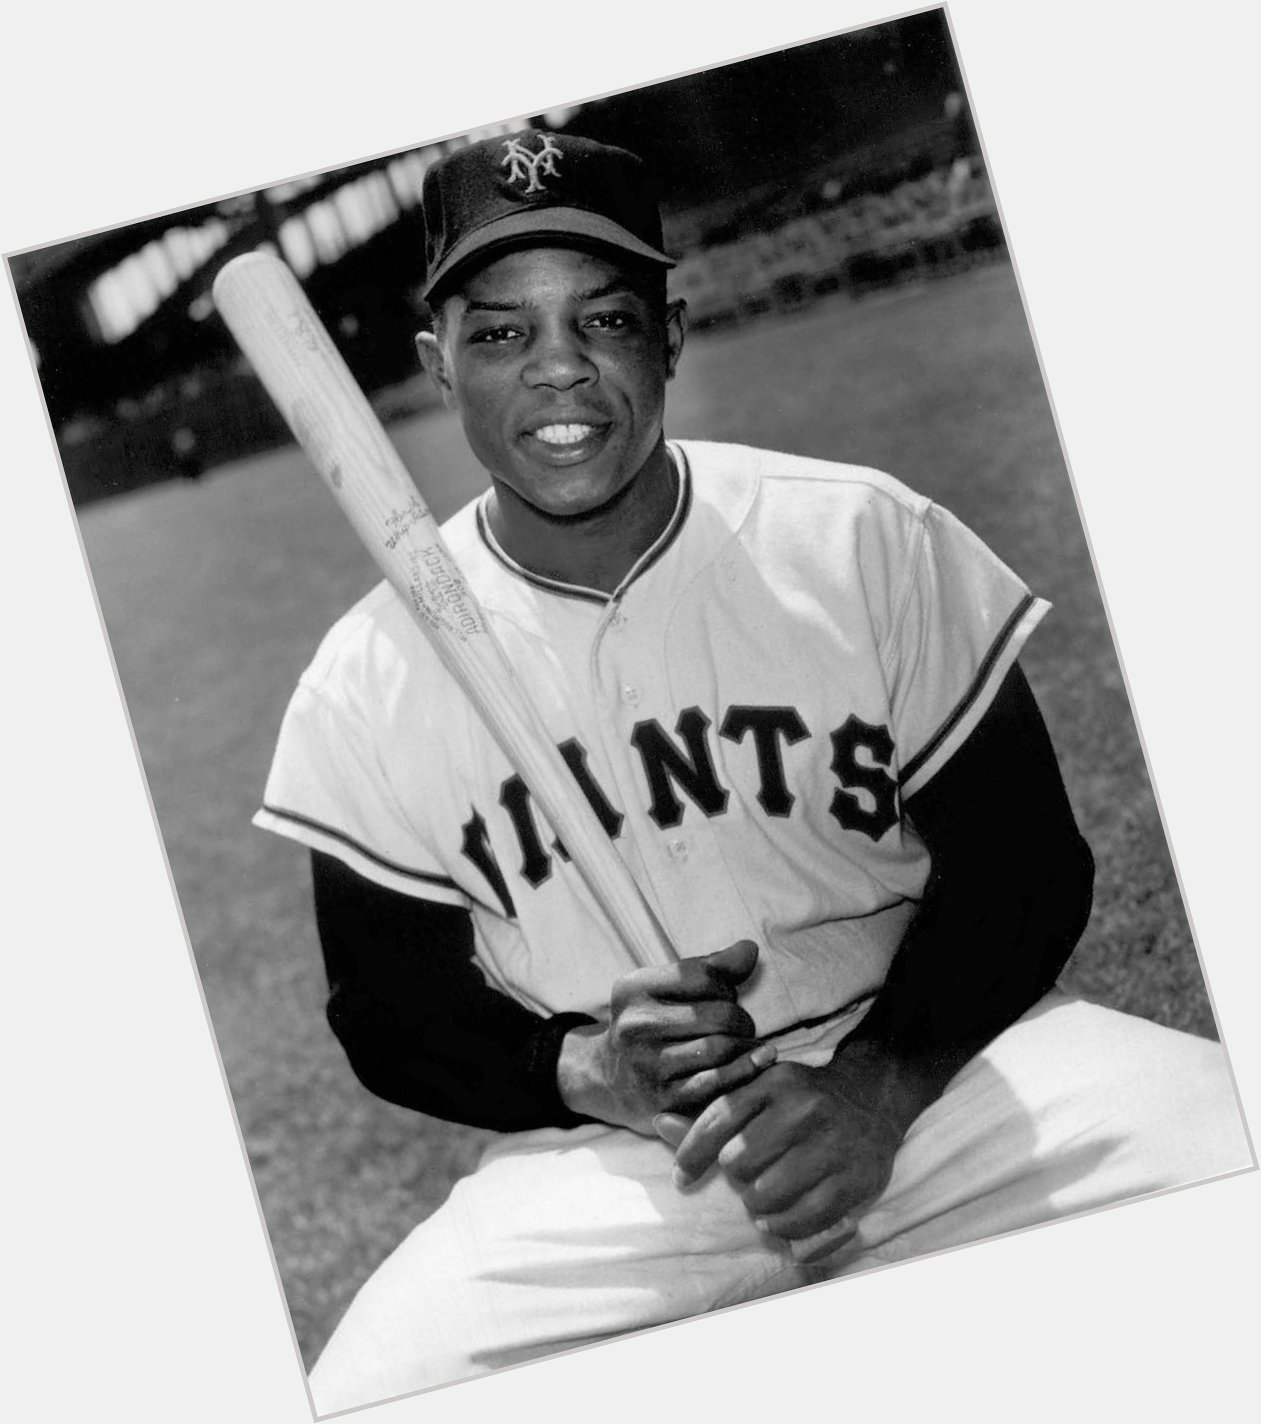 Happy birthday to one of the greatest to ever take the field, Willie Mays! 